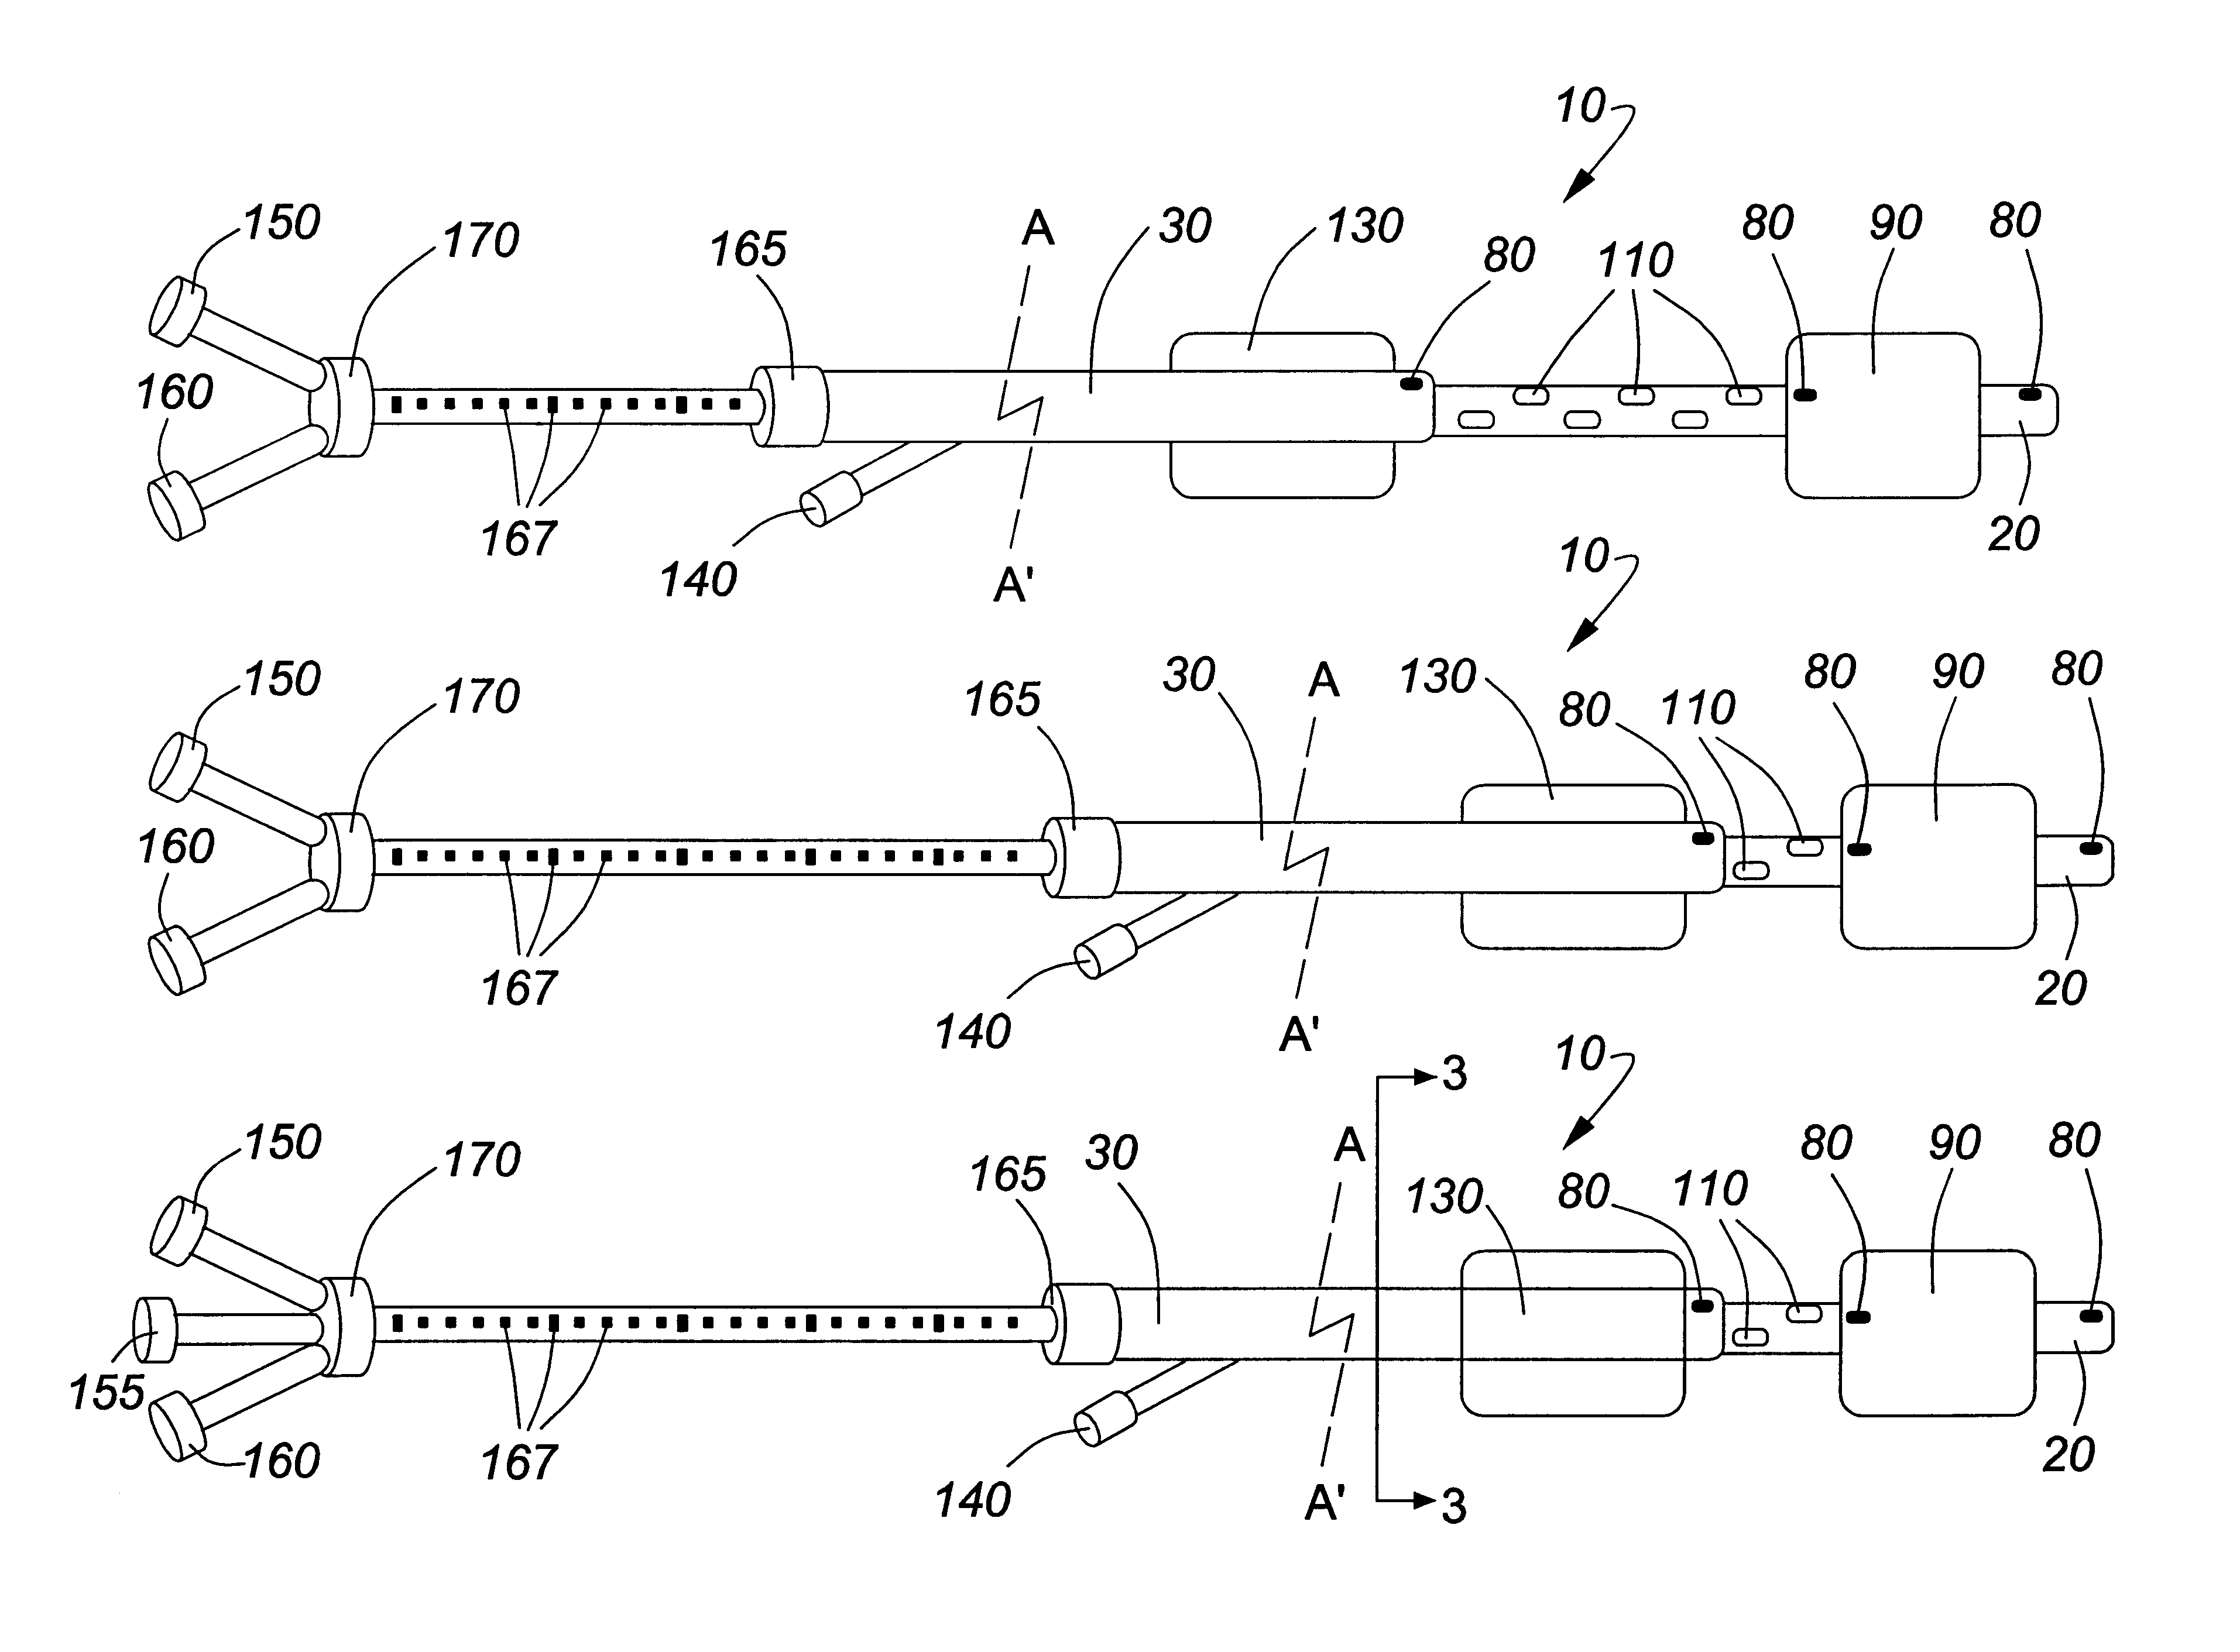 Adjustable multi-balloon local delivery device